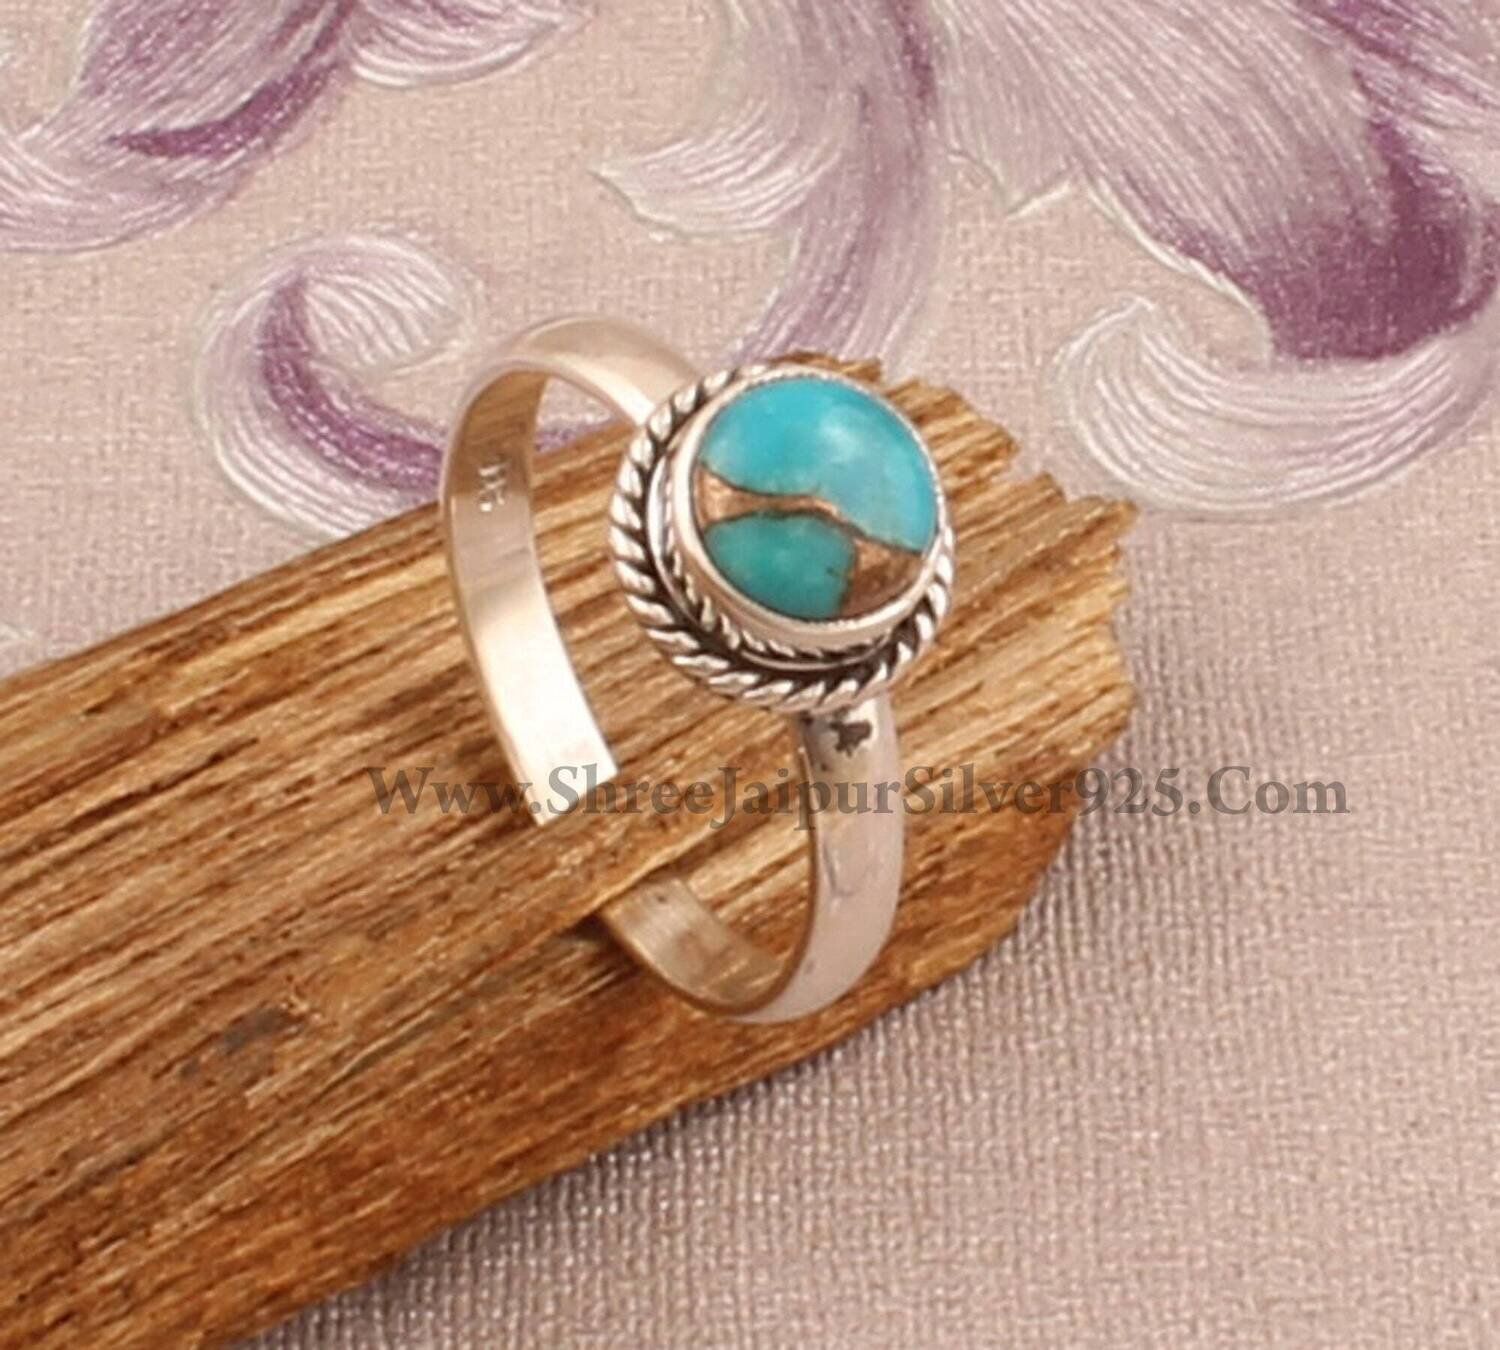 Solid 925-Sterling Silver Ring With Turquoise Gemstone Boho Ring Middle Finger Ring Gift For You L# -283349-RCyber2021Bestseller2021Etsy